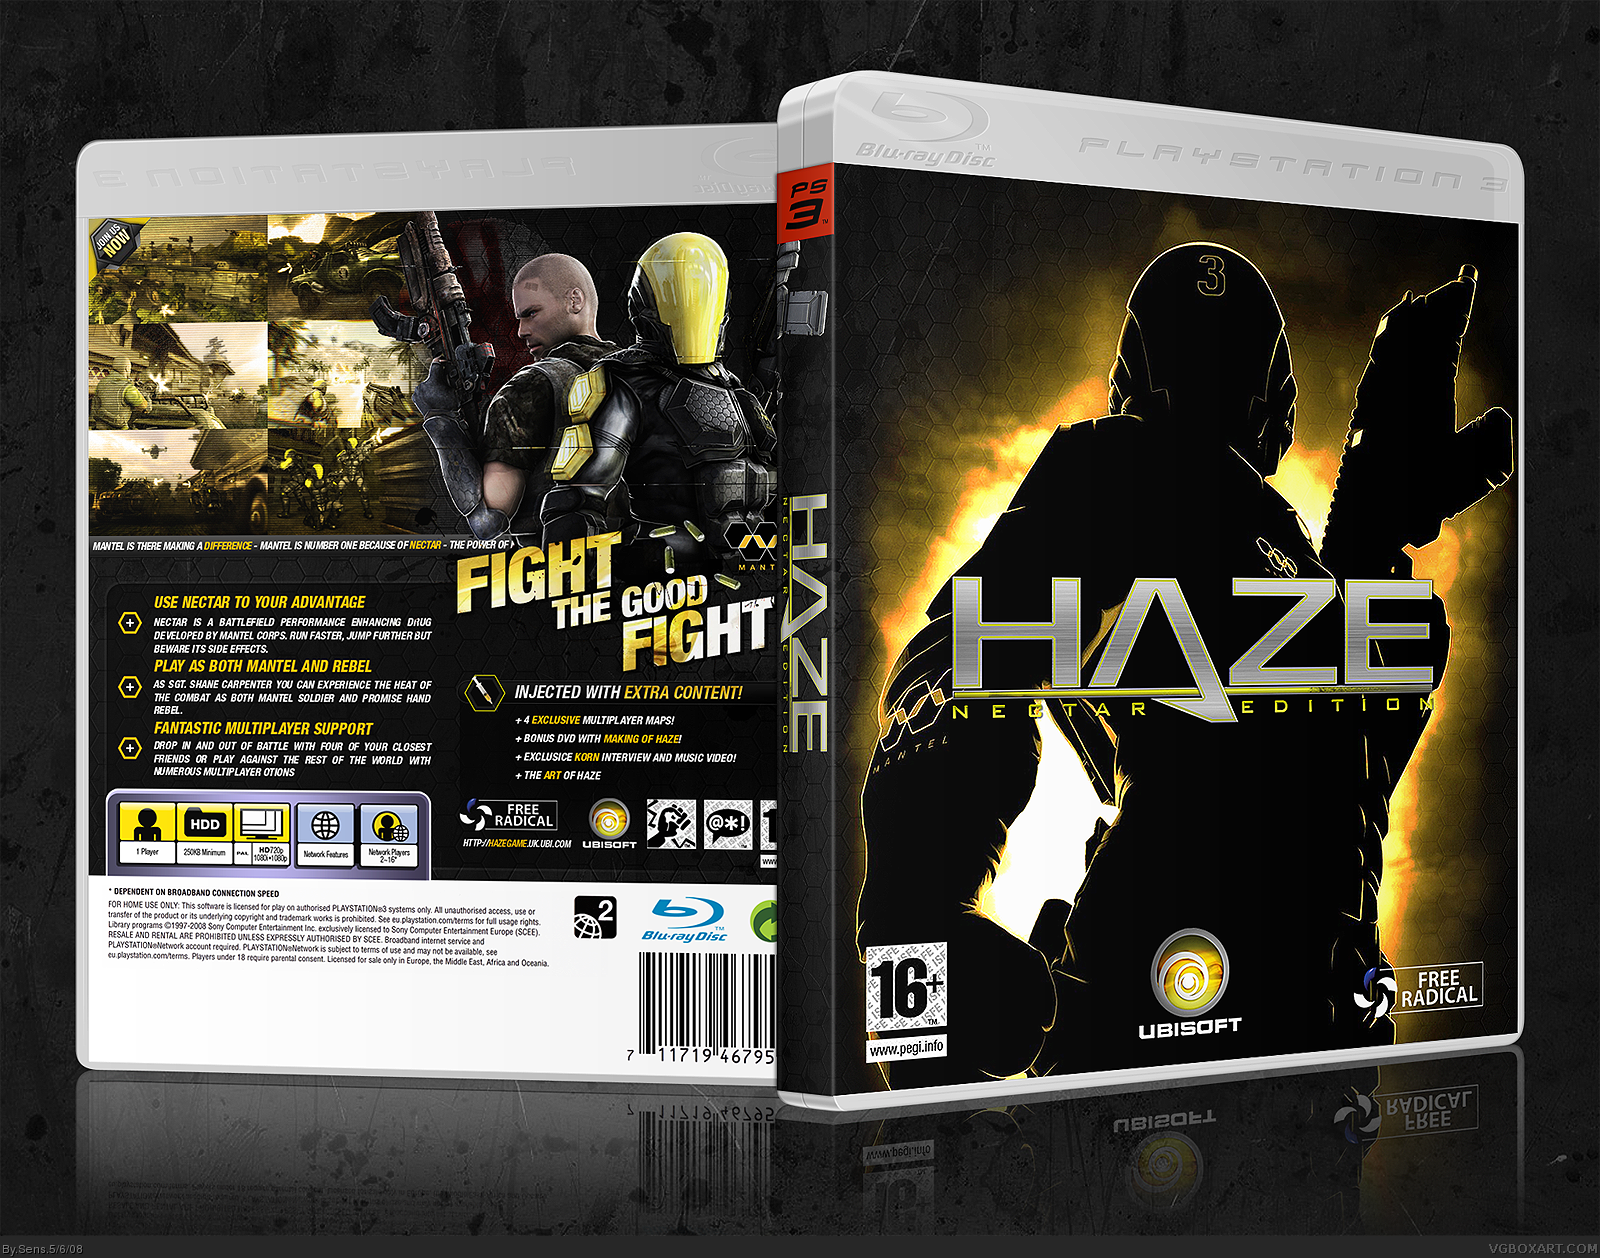 Haze Limited Collecter's Edition box cover